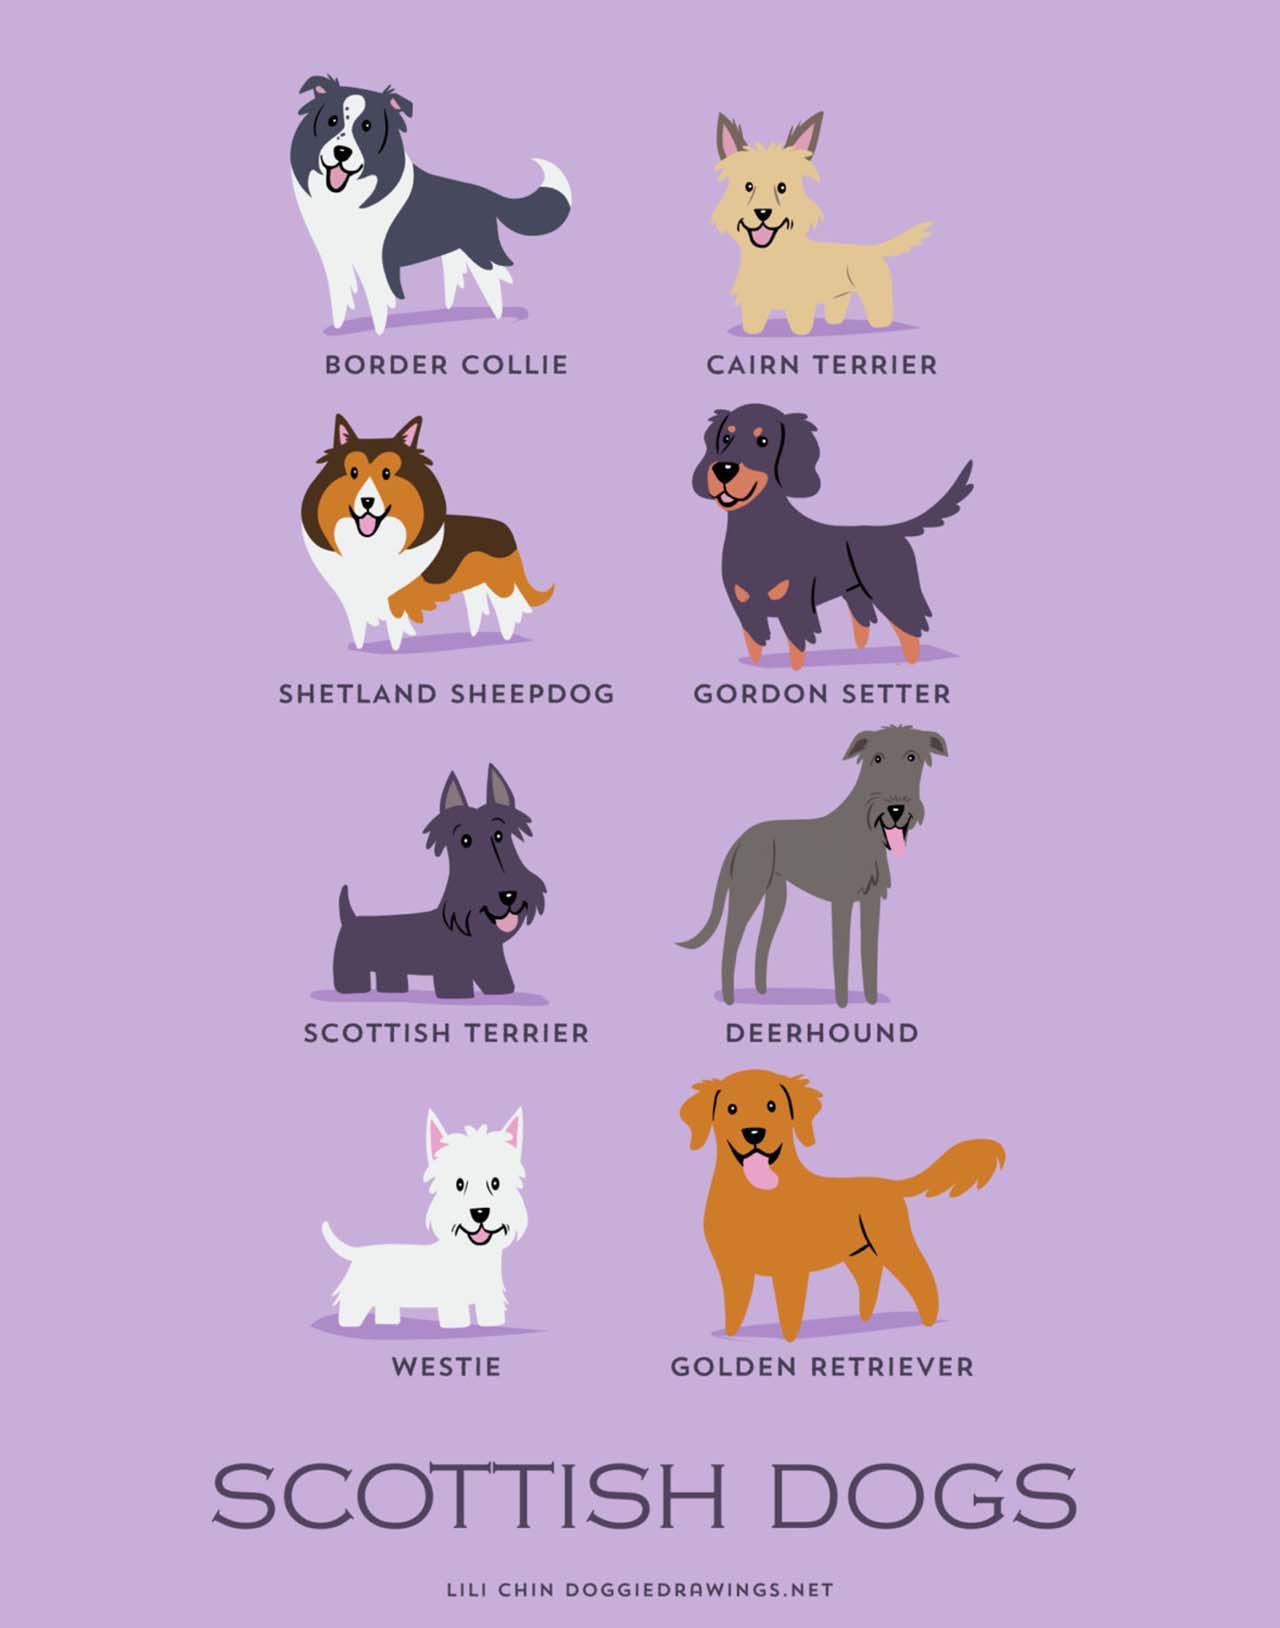 Origin Of Dogs: Cute Illustration By Lili Chin Show Where Dog Breeds Originating From #1: Scottish Dogs